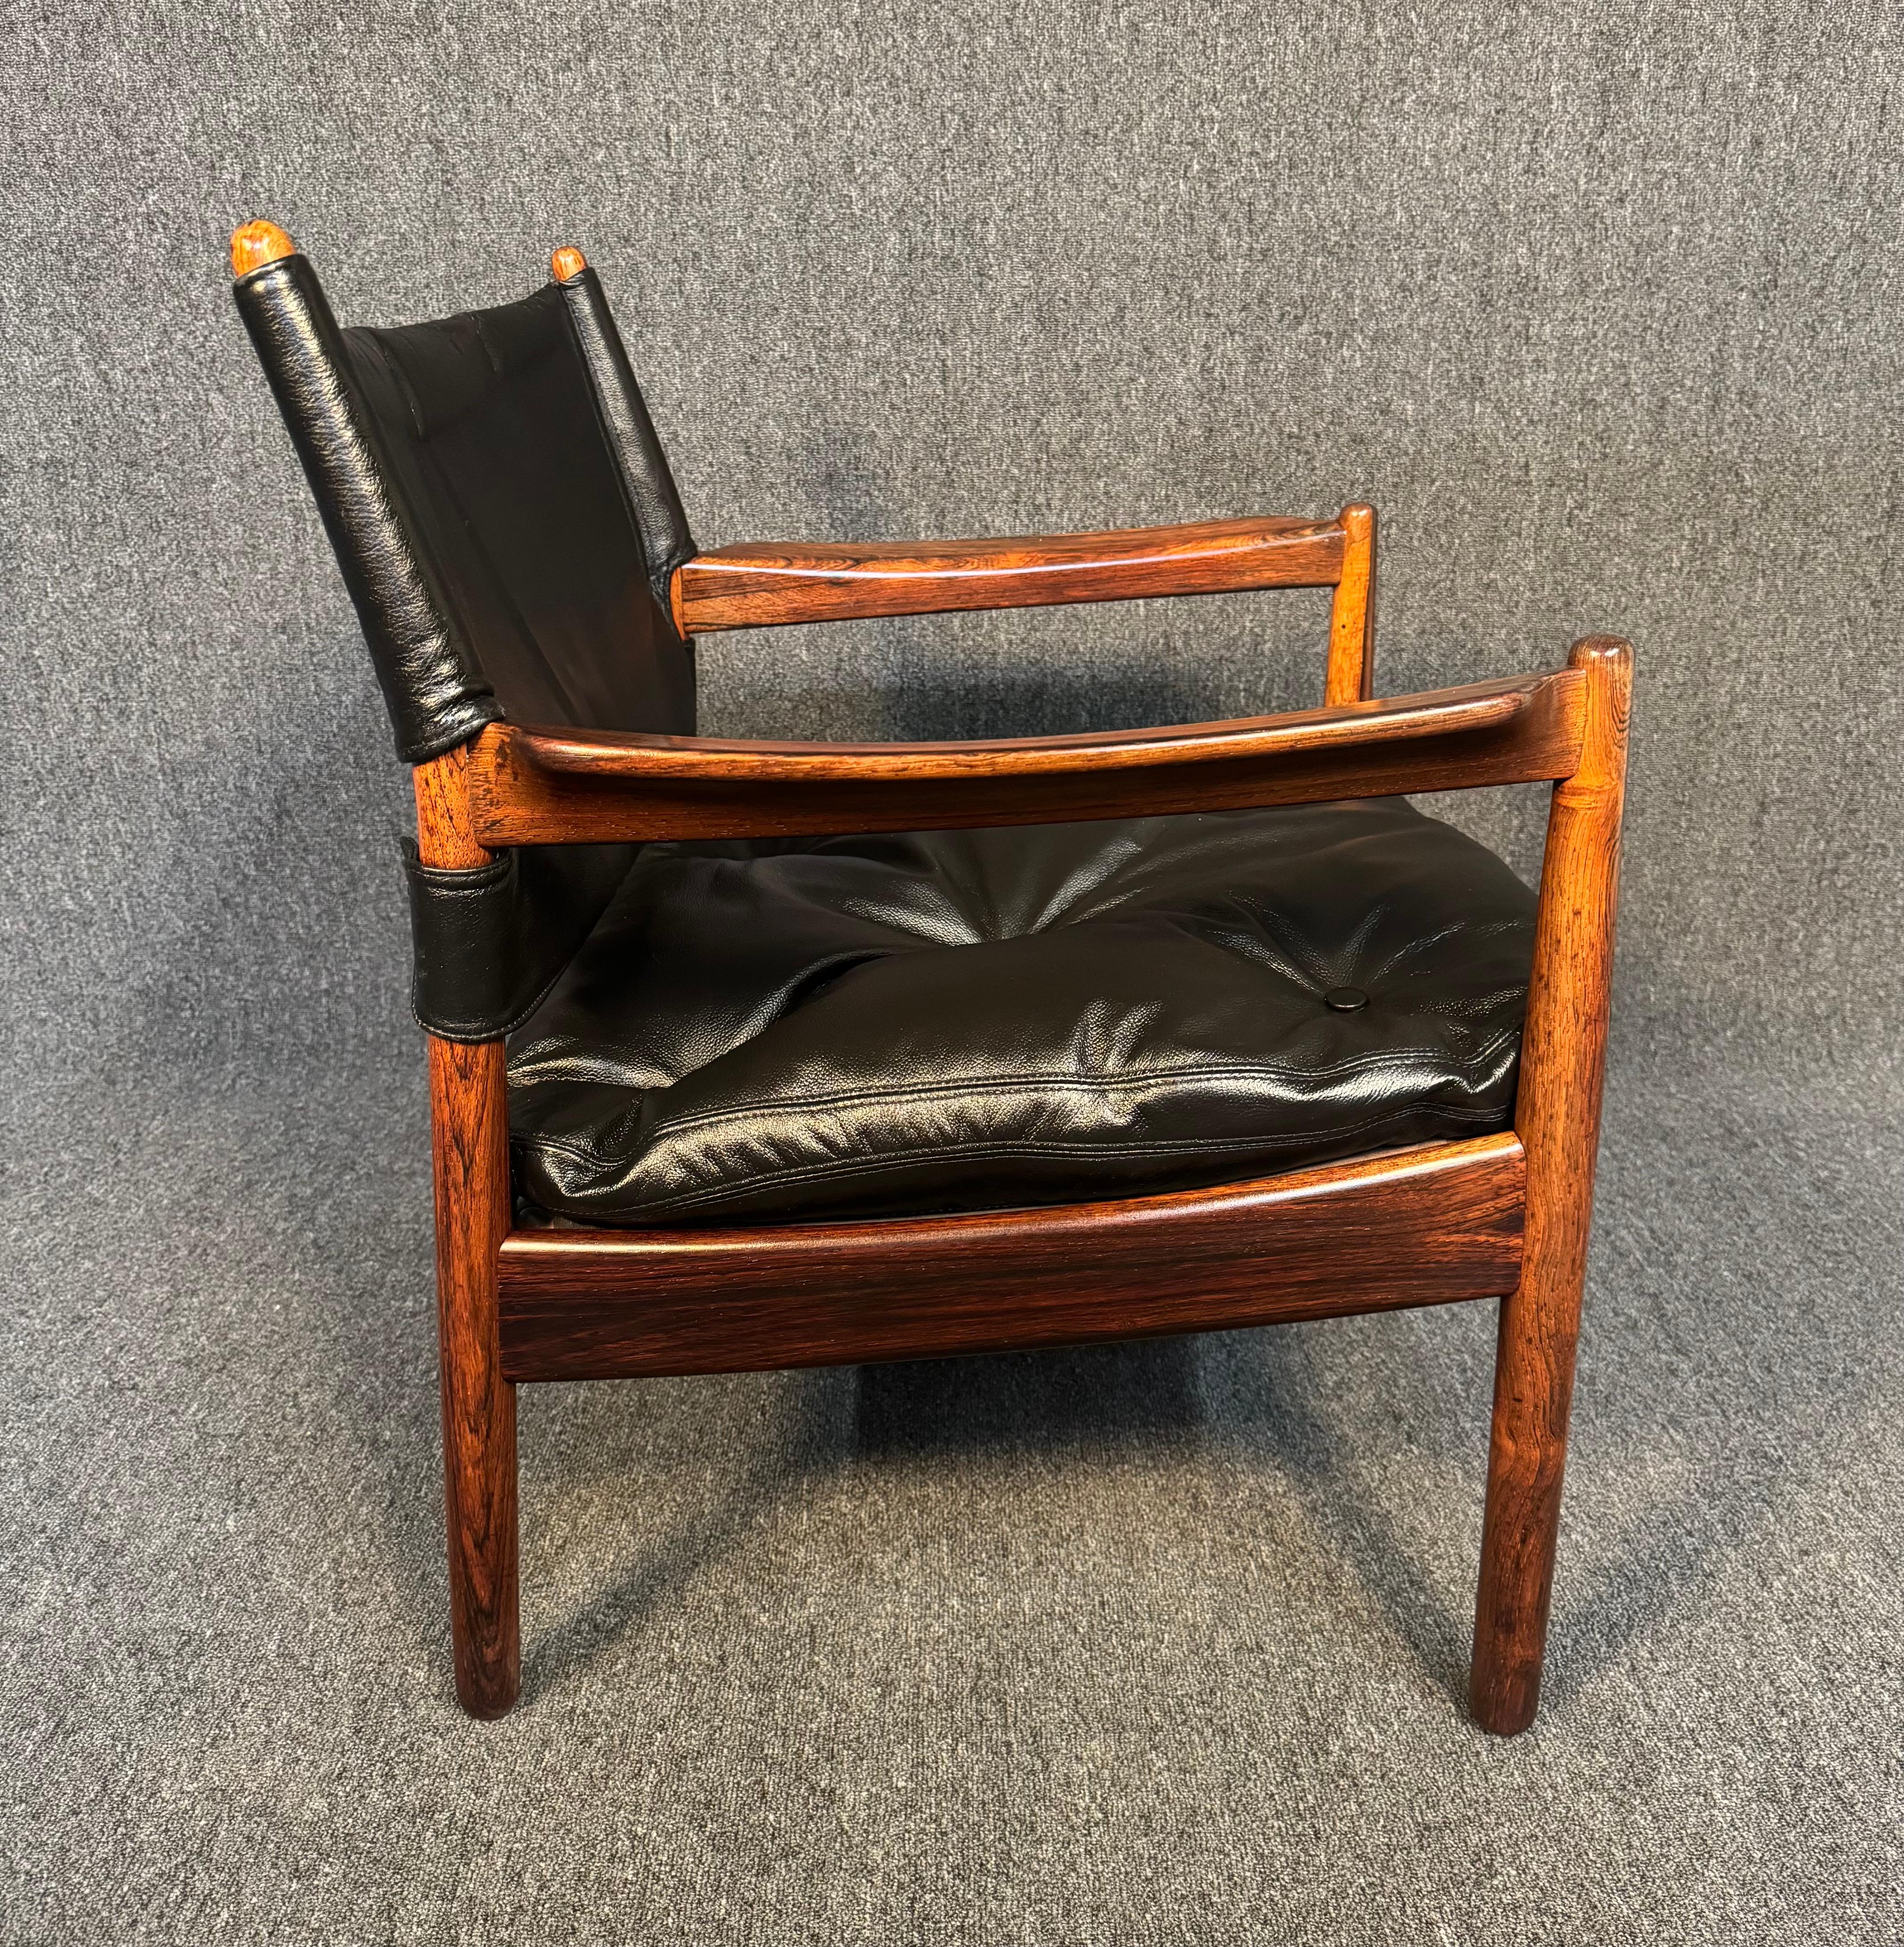 Here is a rare and beautiful scandinavian modern easy chair in rosewood and leather designed by Gunnar Myrstrand and manufatured by Källermo in Sweden in the 1960's.
This comfortable chair, recently imported from Europe to California, features a